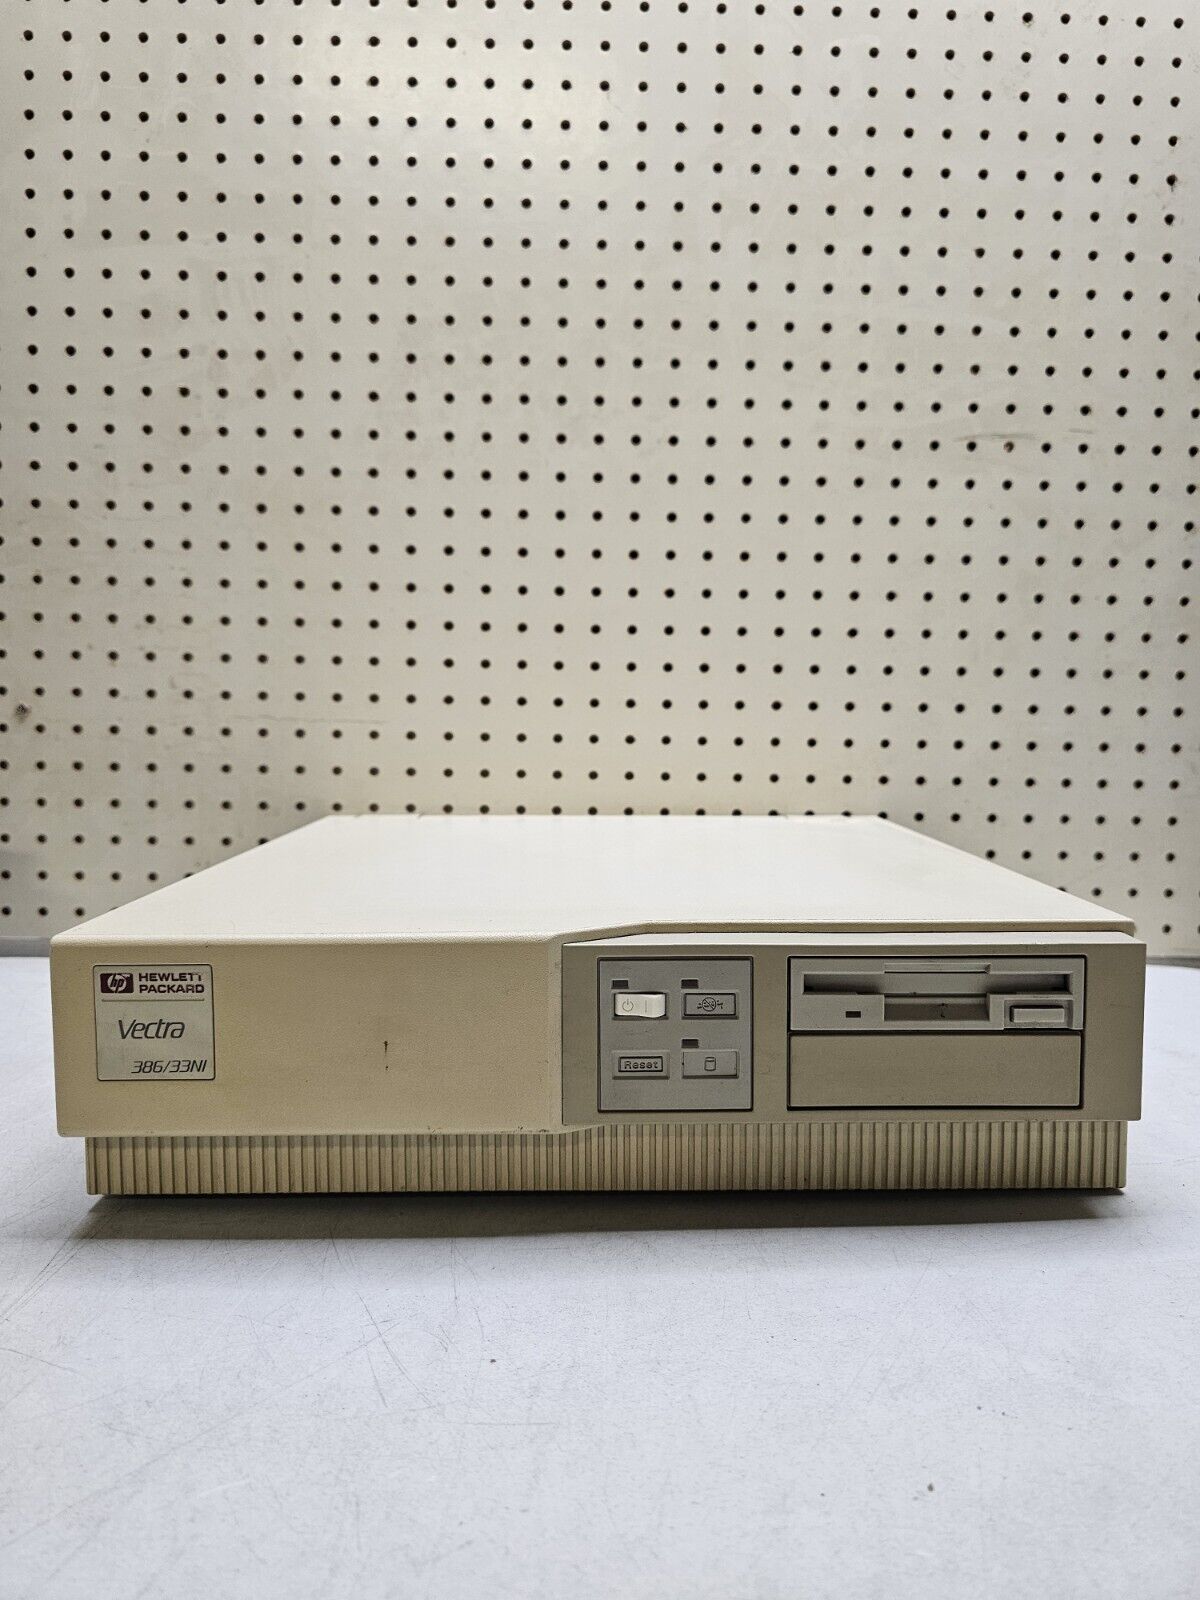 Vintage Hewlett Packard Vectra 386/33NI Computer No Power Cord Untested